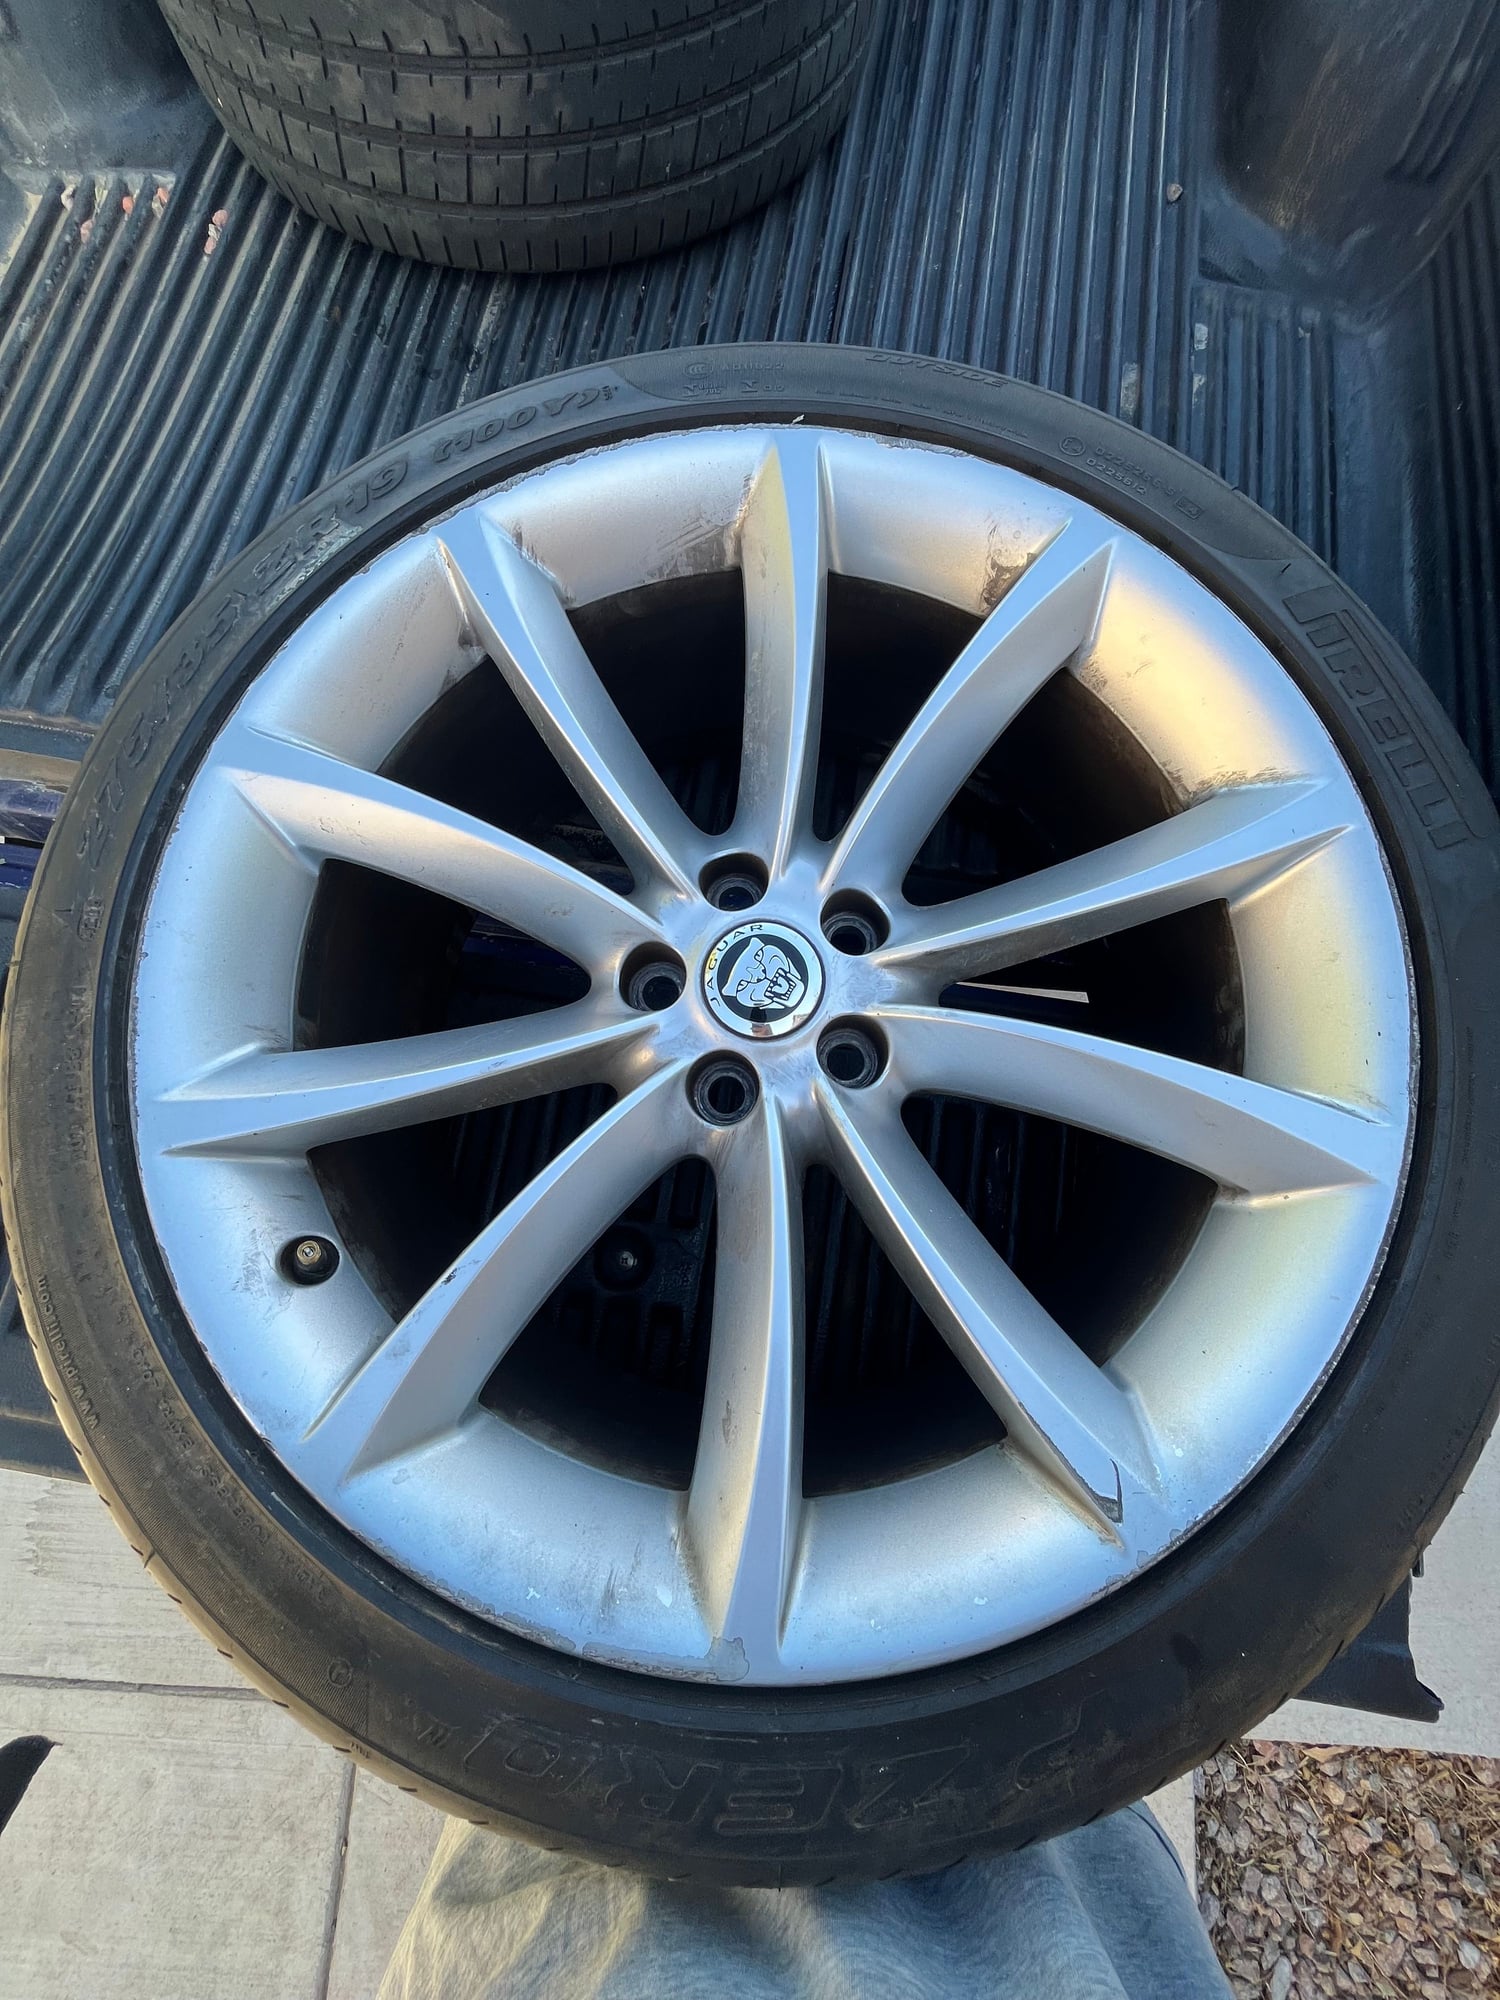 Wheels and Tires/Axles - F-type propeller wheel set 19” - Used - All Years Jaguar F-Type - Surprise, AZ 85379, United States